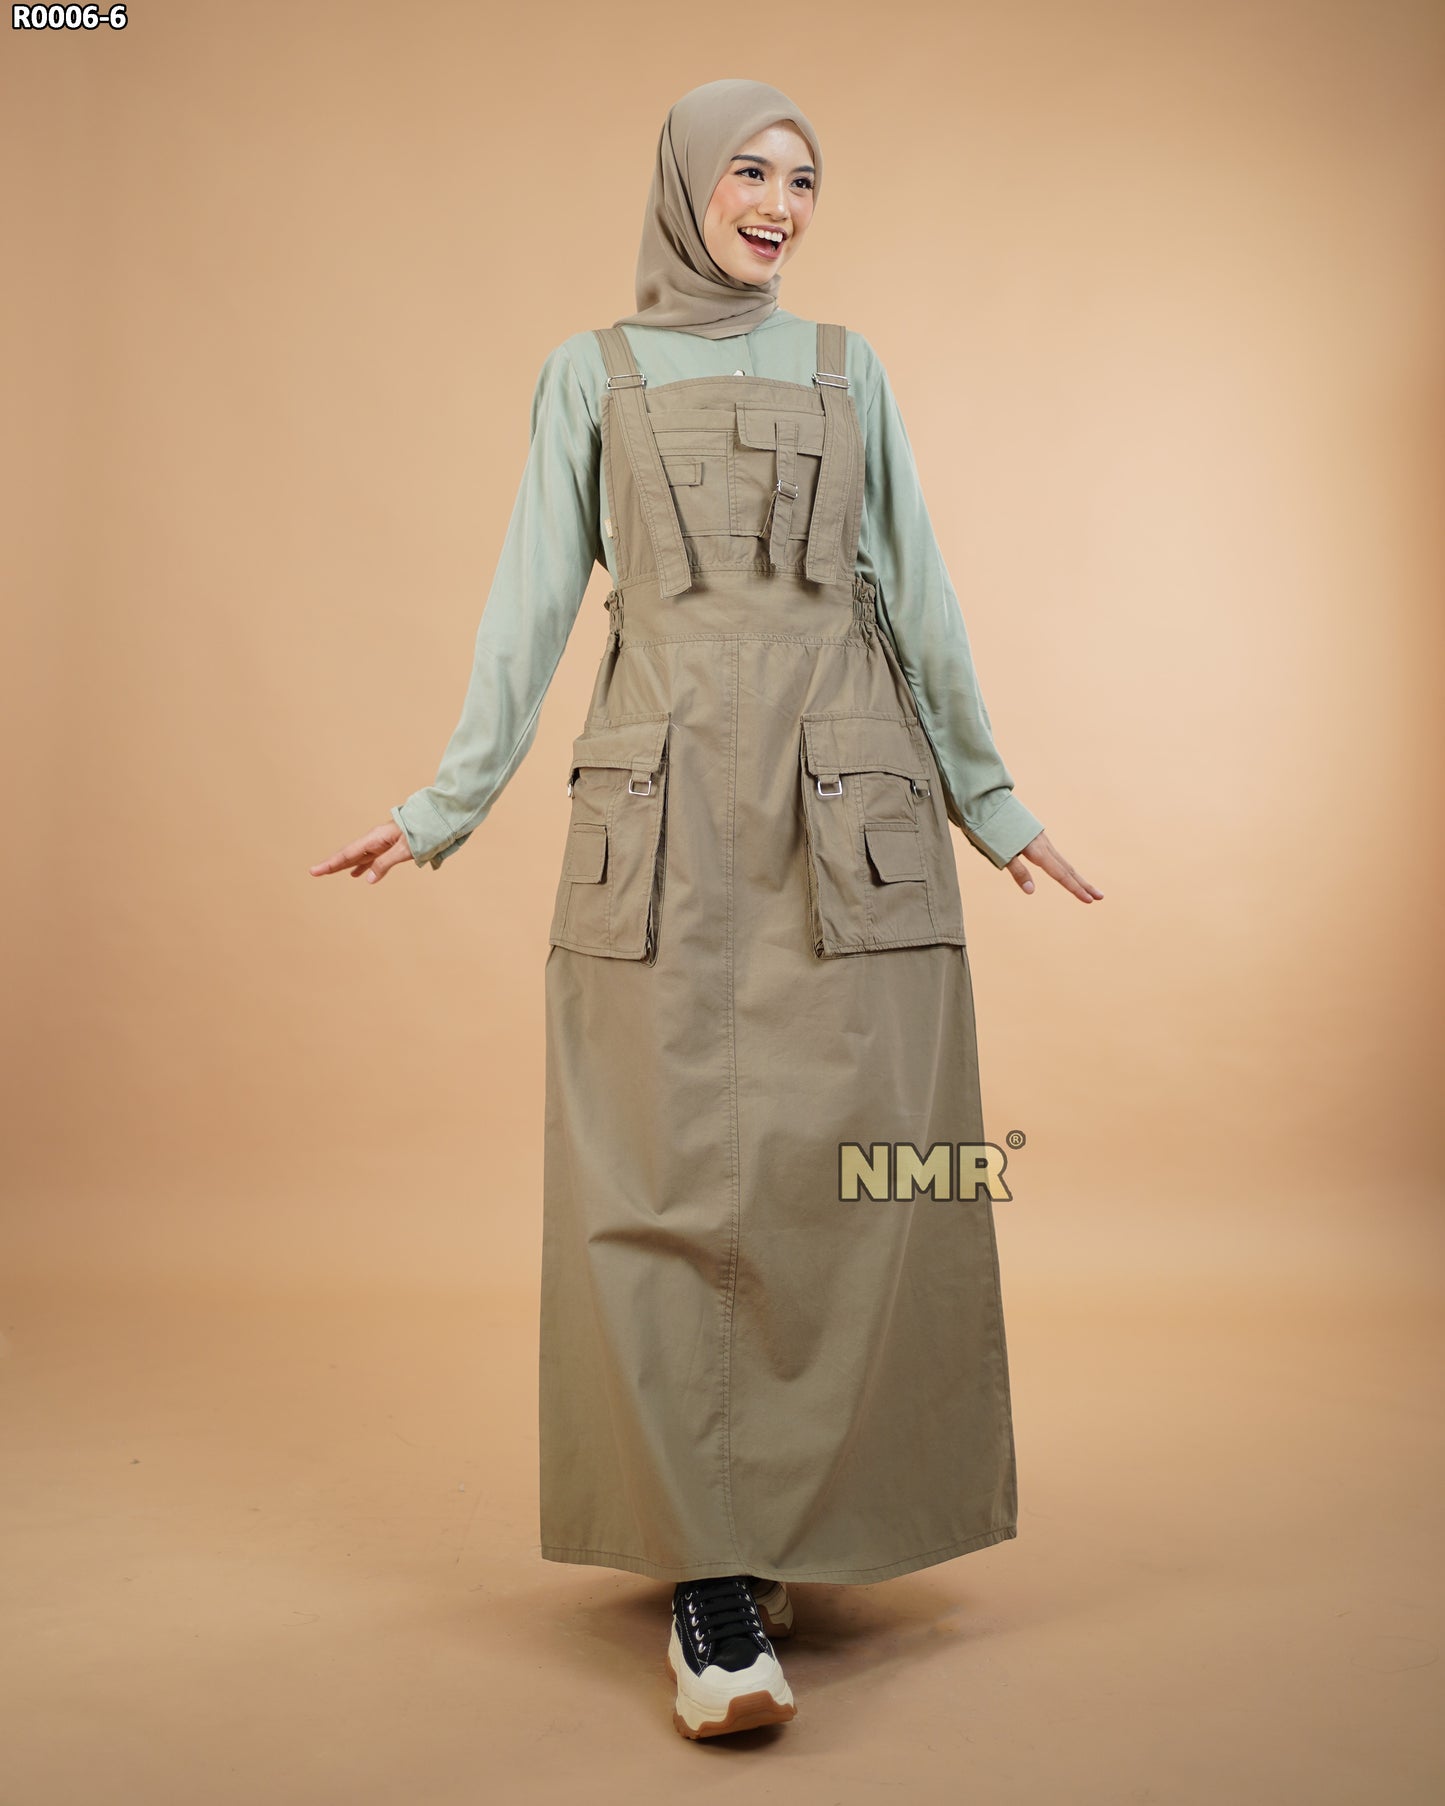 NMR Gamis Jumpsuit Overall Baby Canvas Vol R0006-6